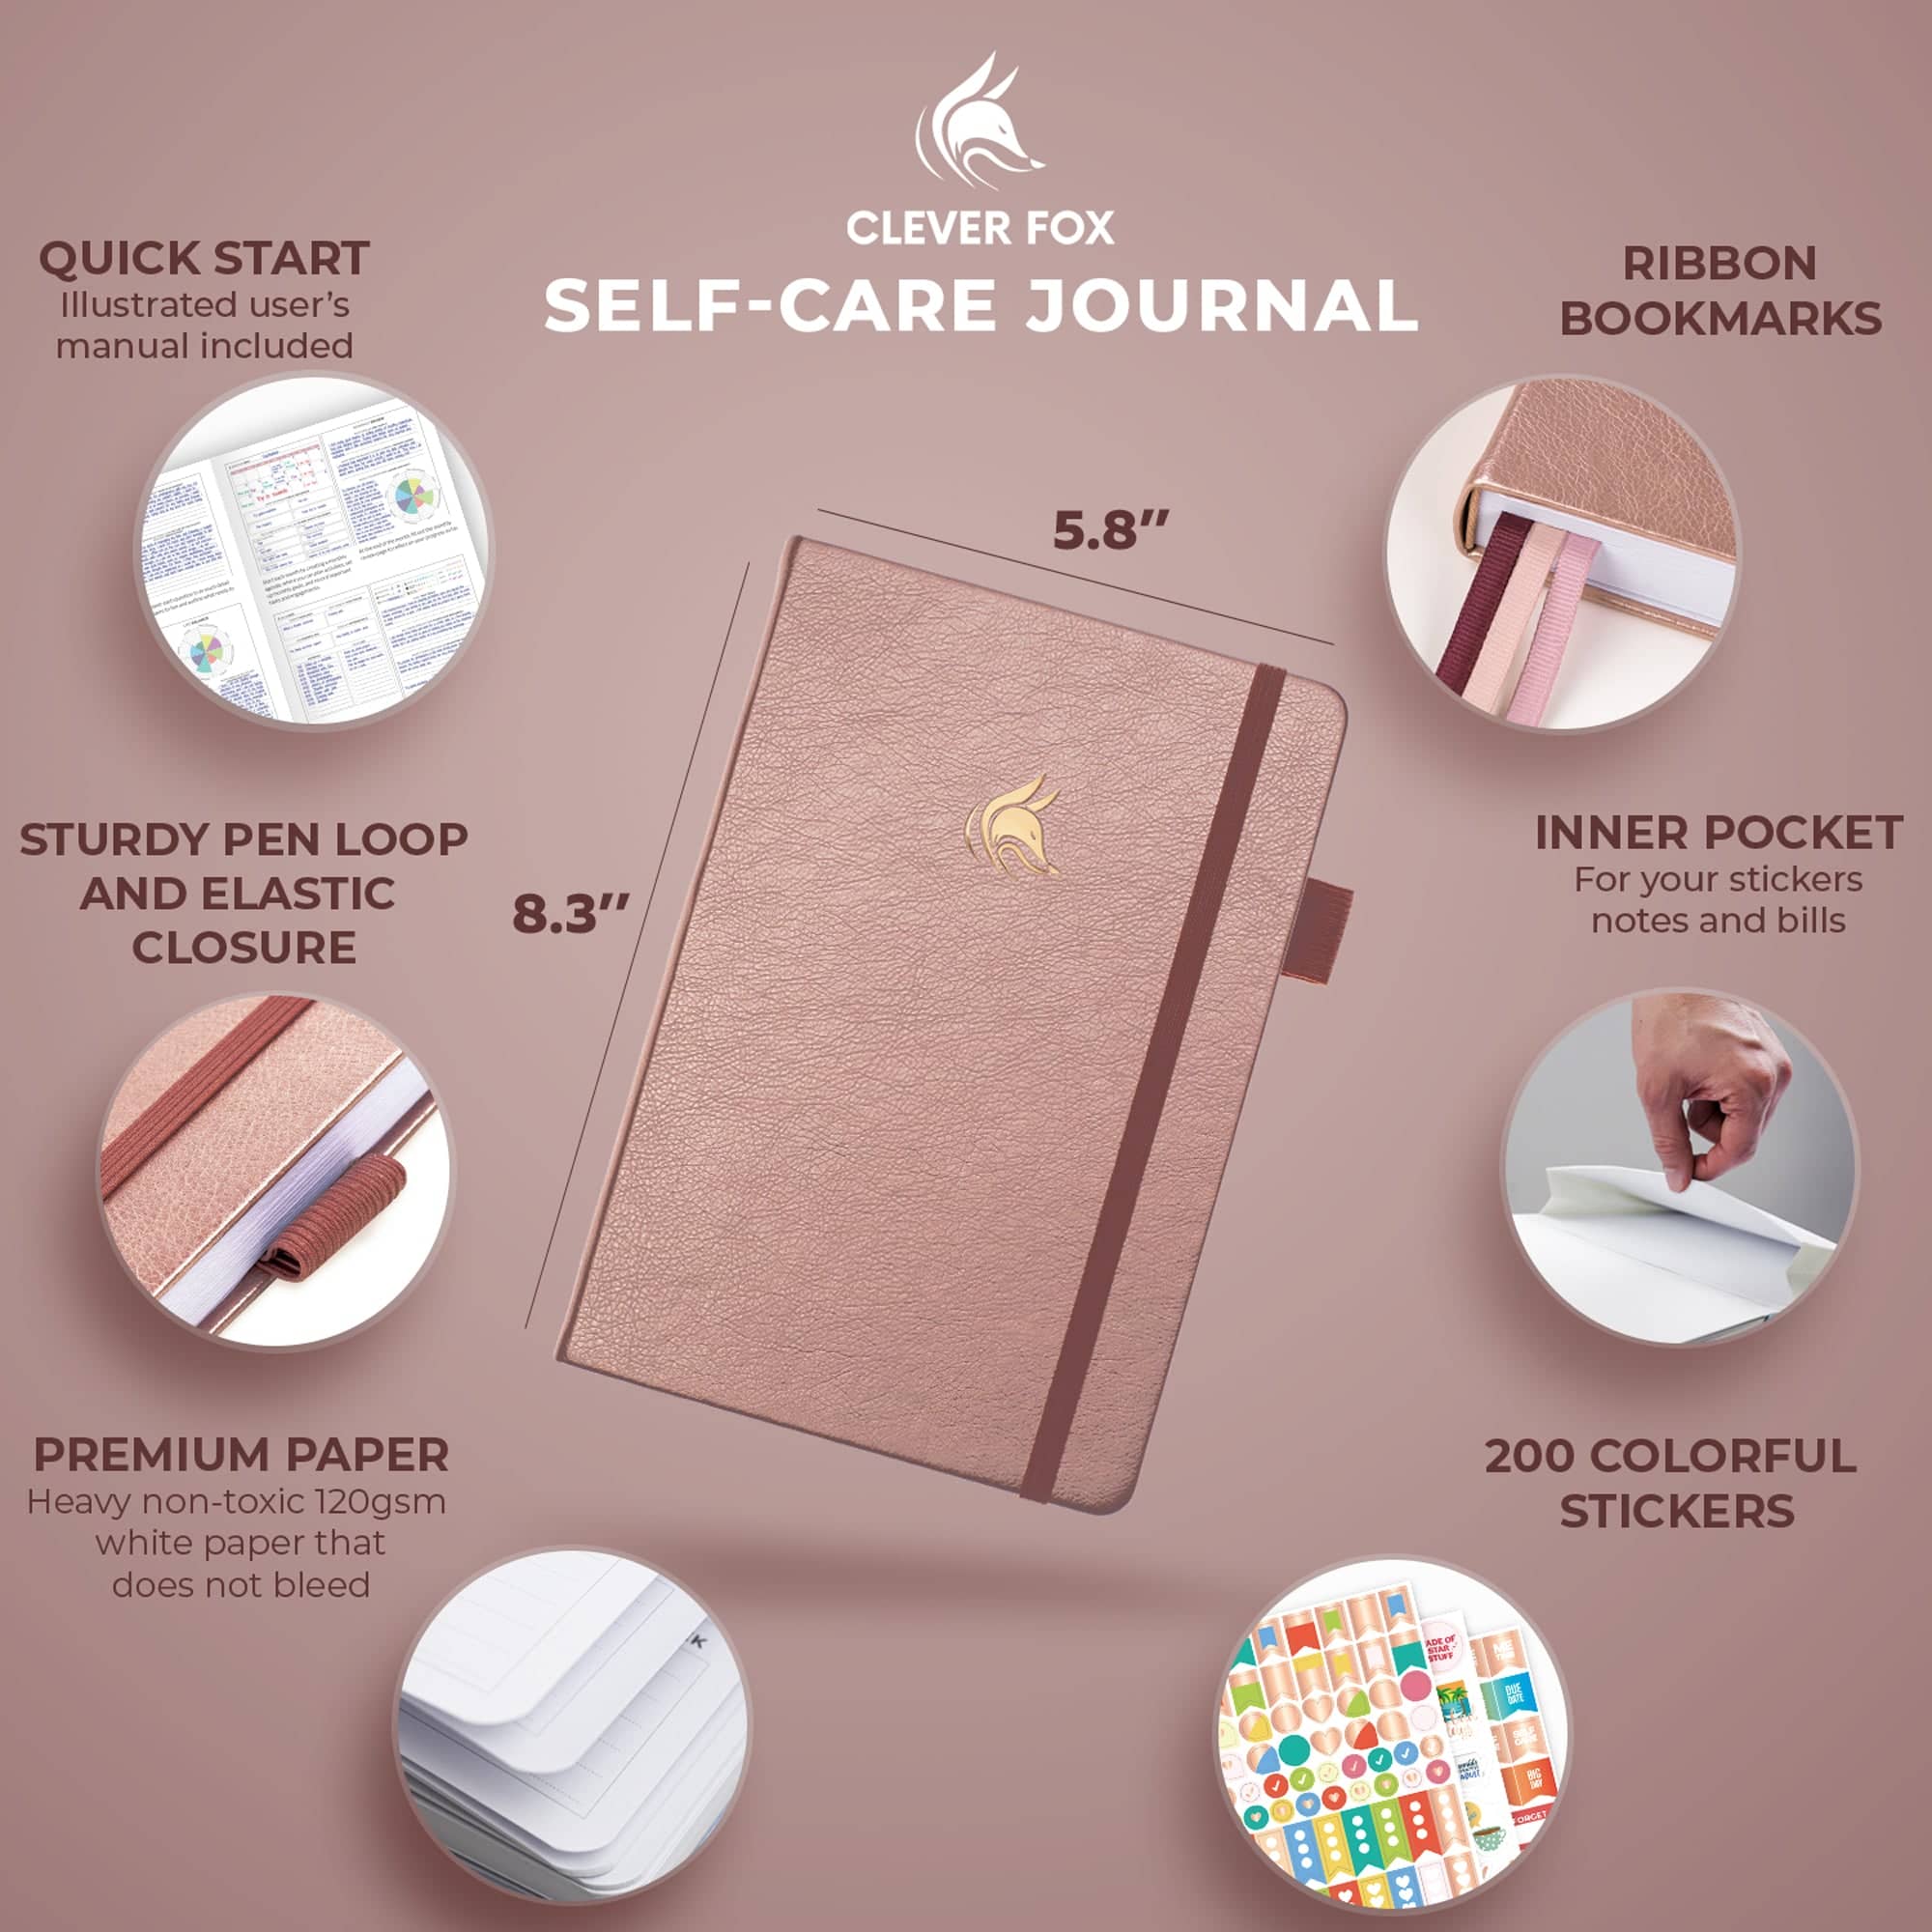 Clever Fox Self-Care Journal - image 2 of 7